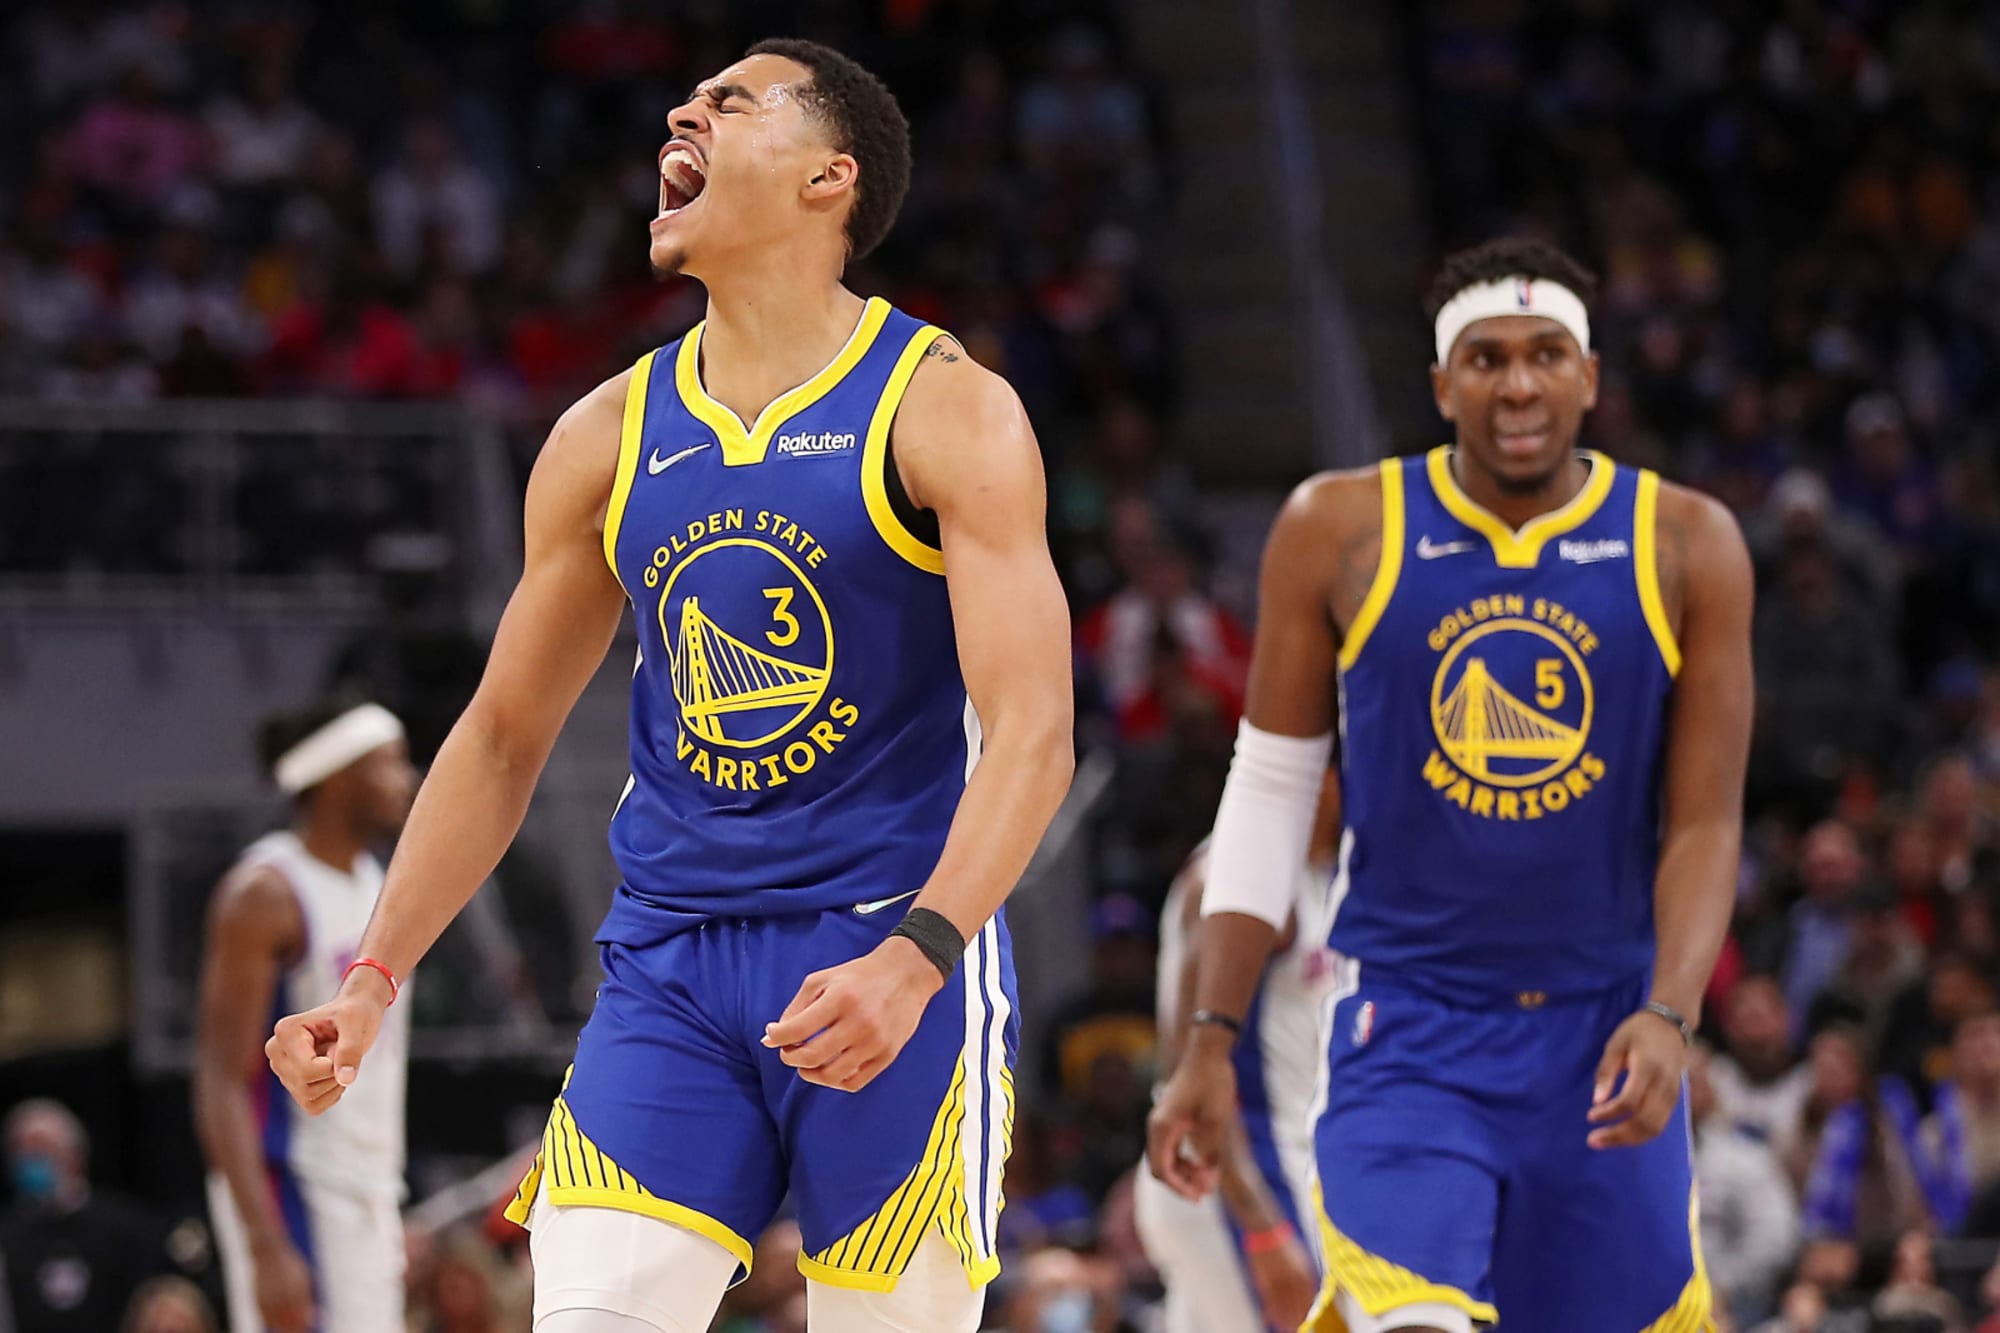 Reports: Jordan Poole agrees to 4-year extension with Warriors